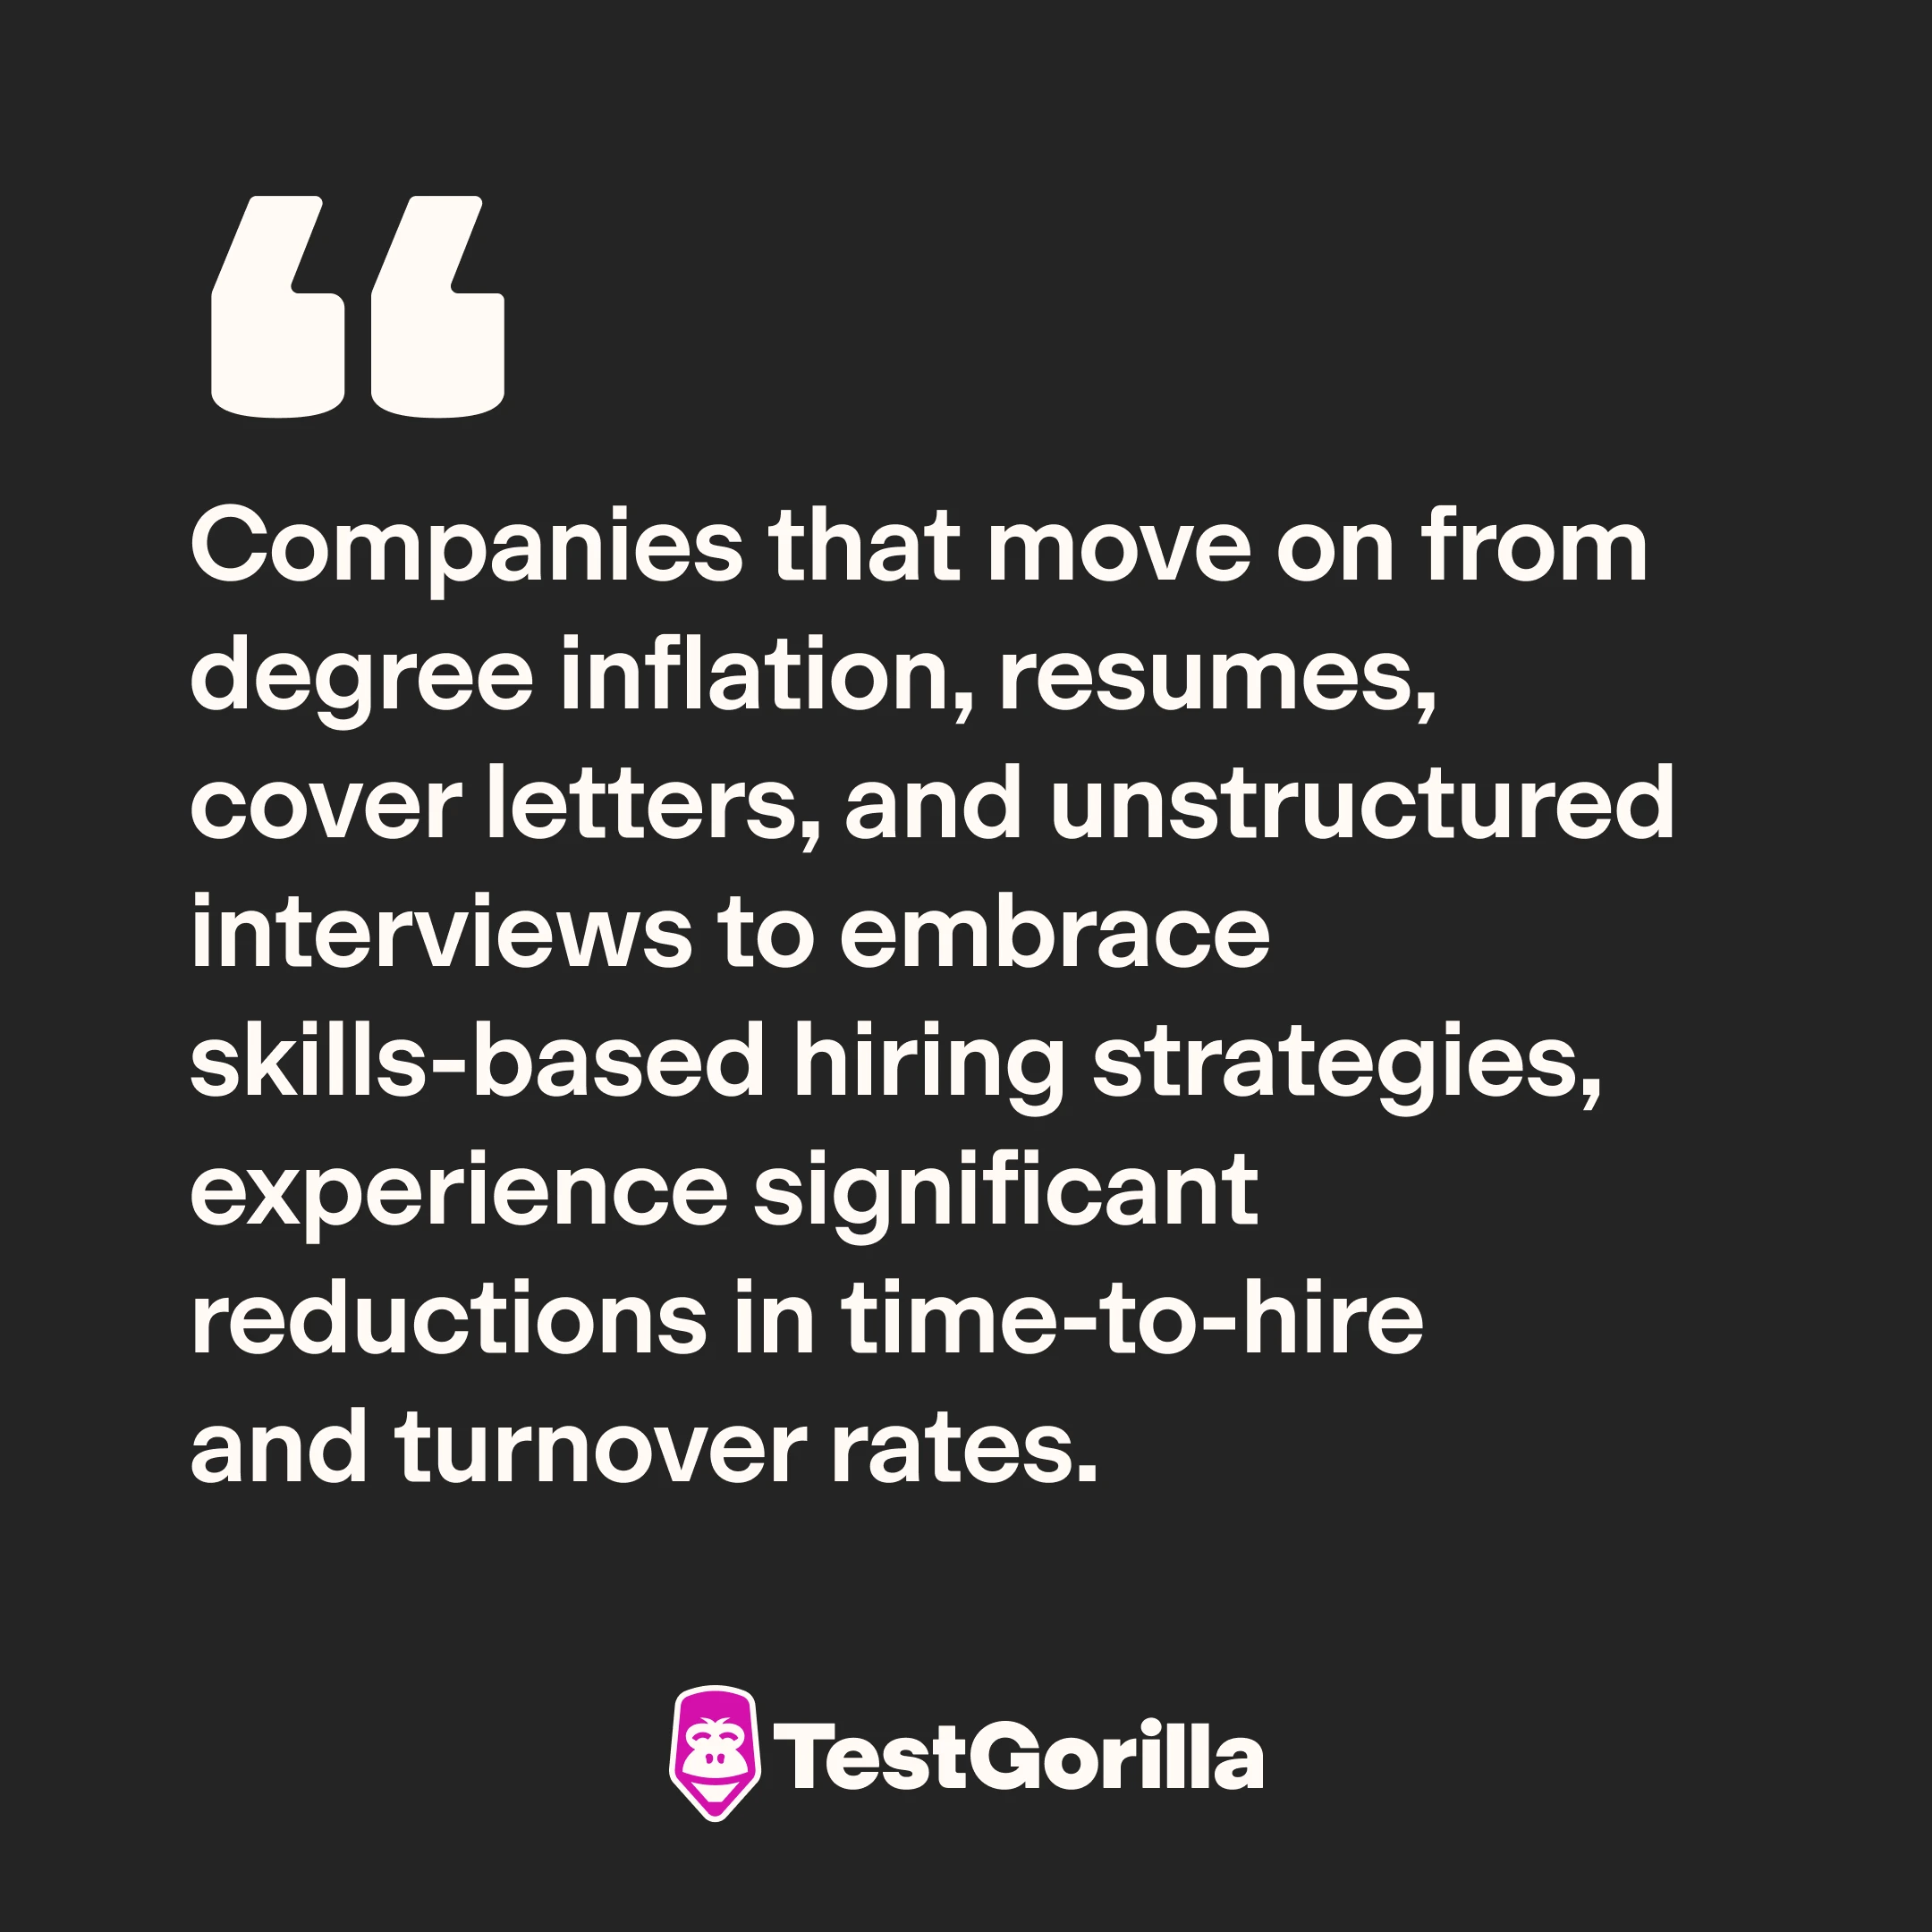 quote about why companies hire faster with skills-based hiring methods